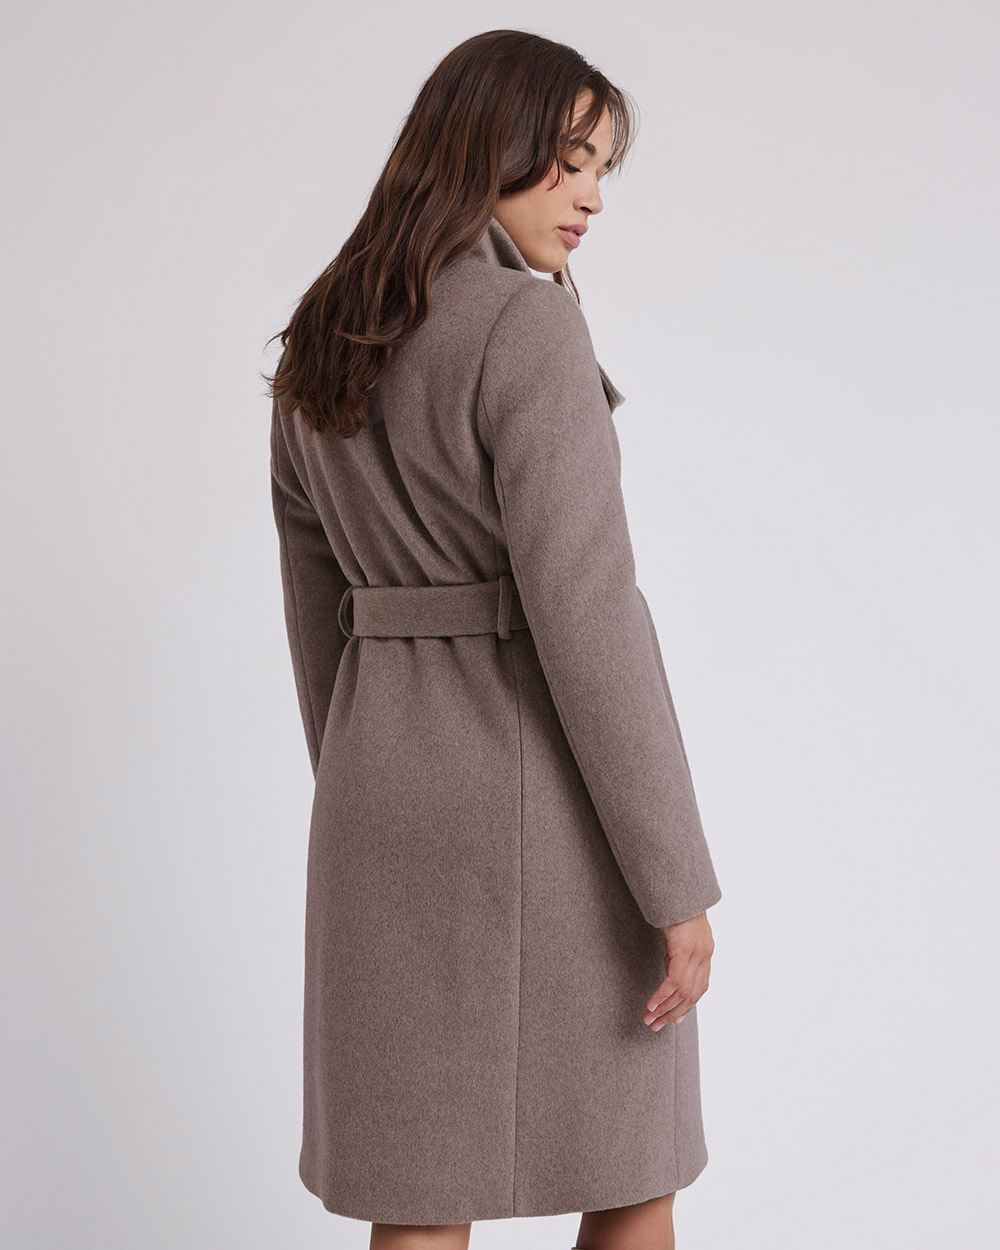 Classic Wool Coat with Polyfill Insulation